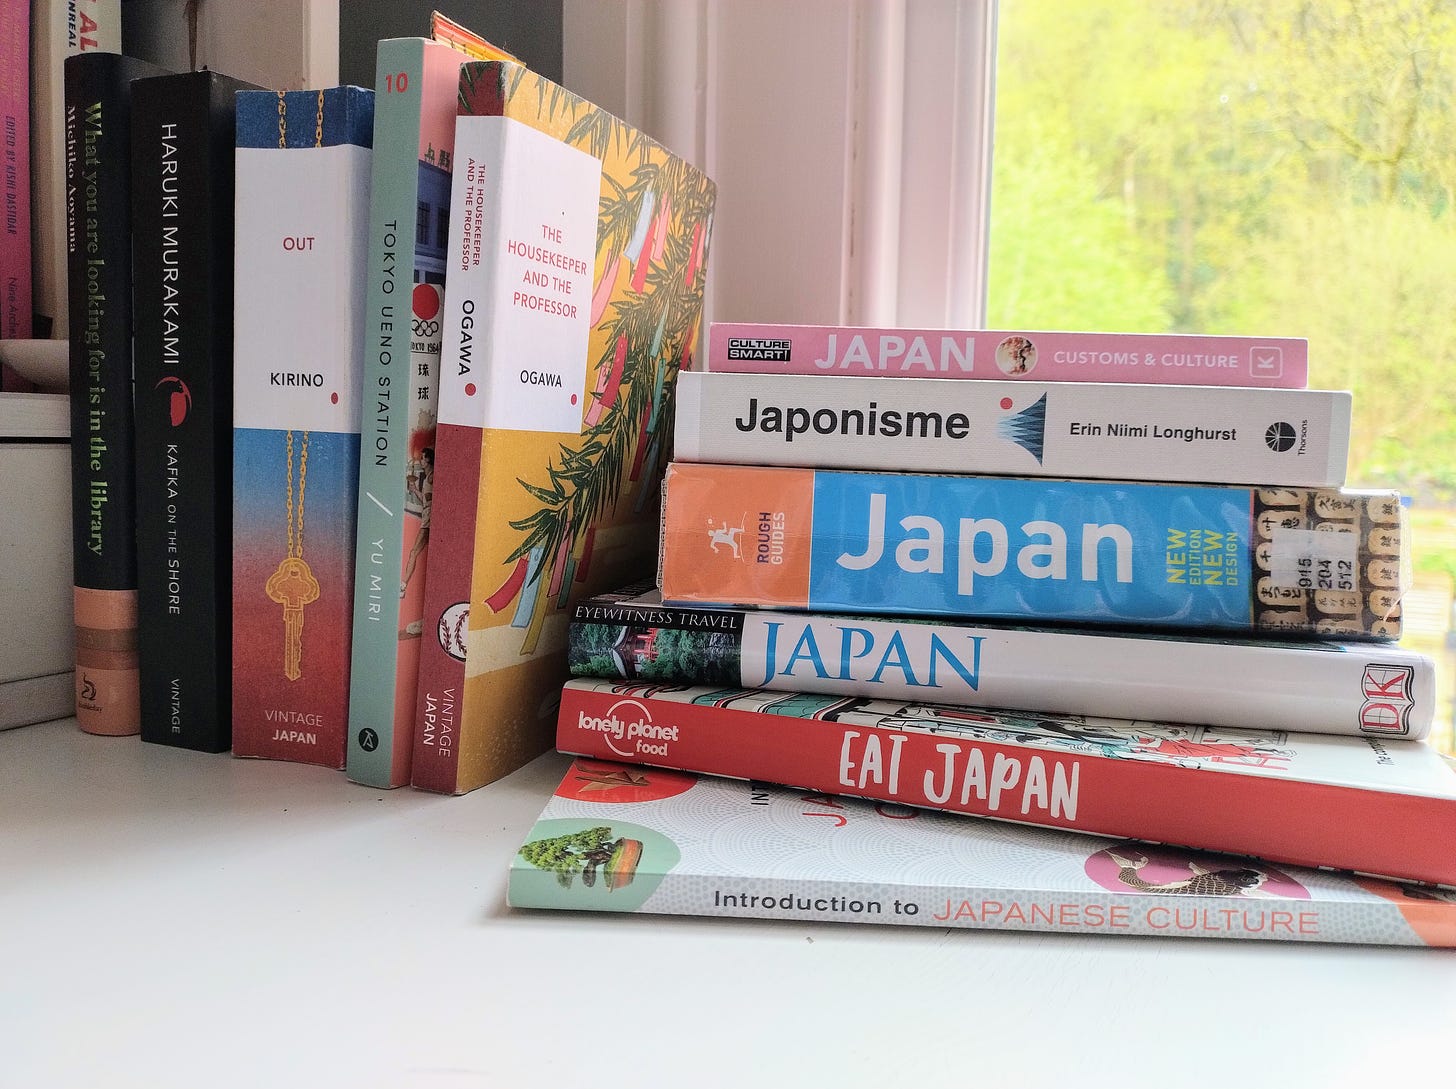 A selection of travel books, books on Japanese culture and Japanese novels that help with research